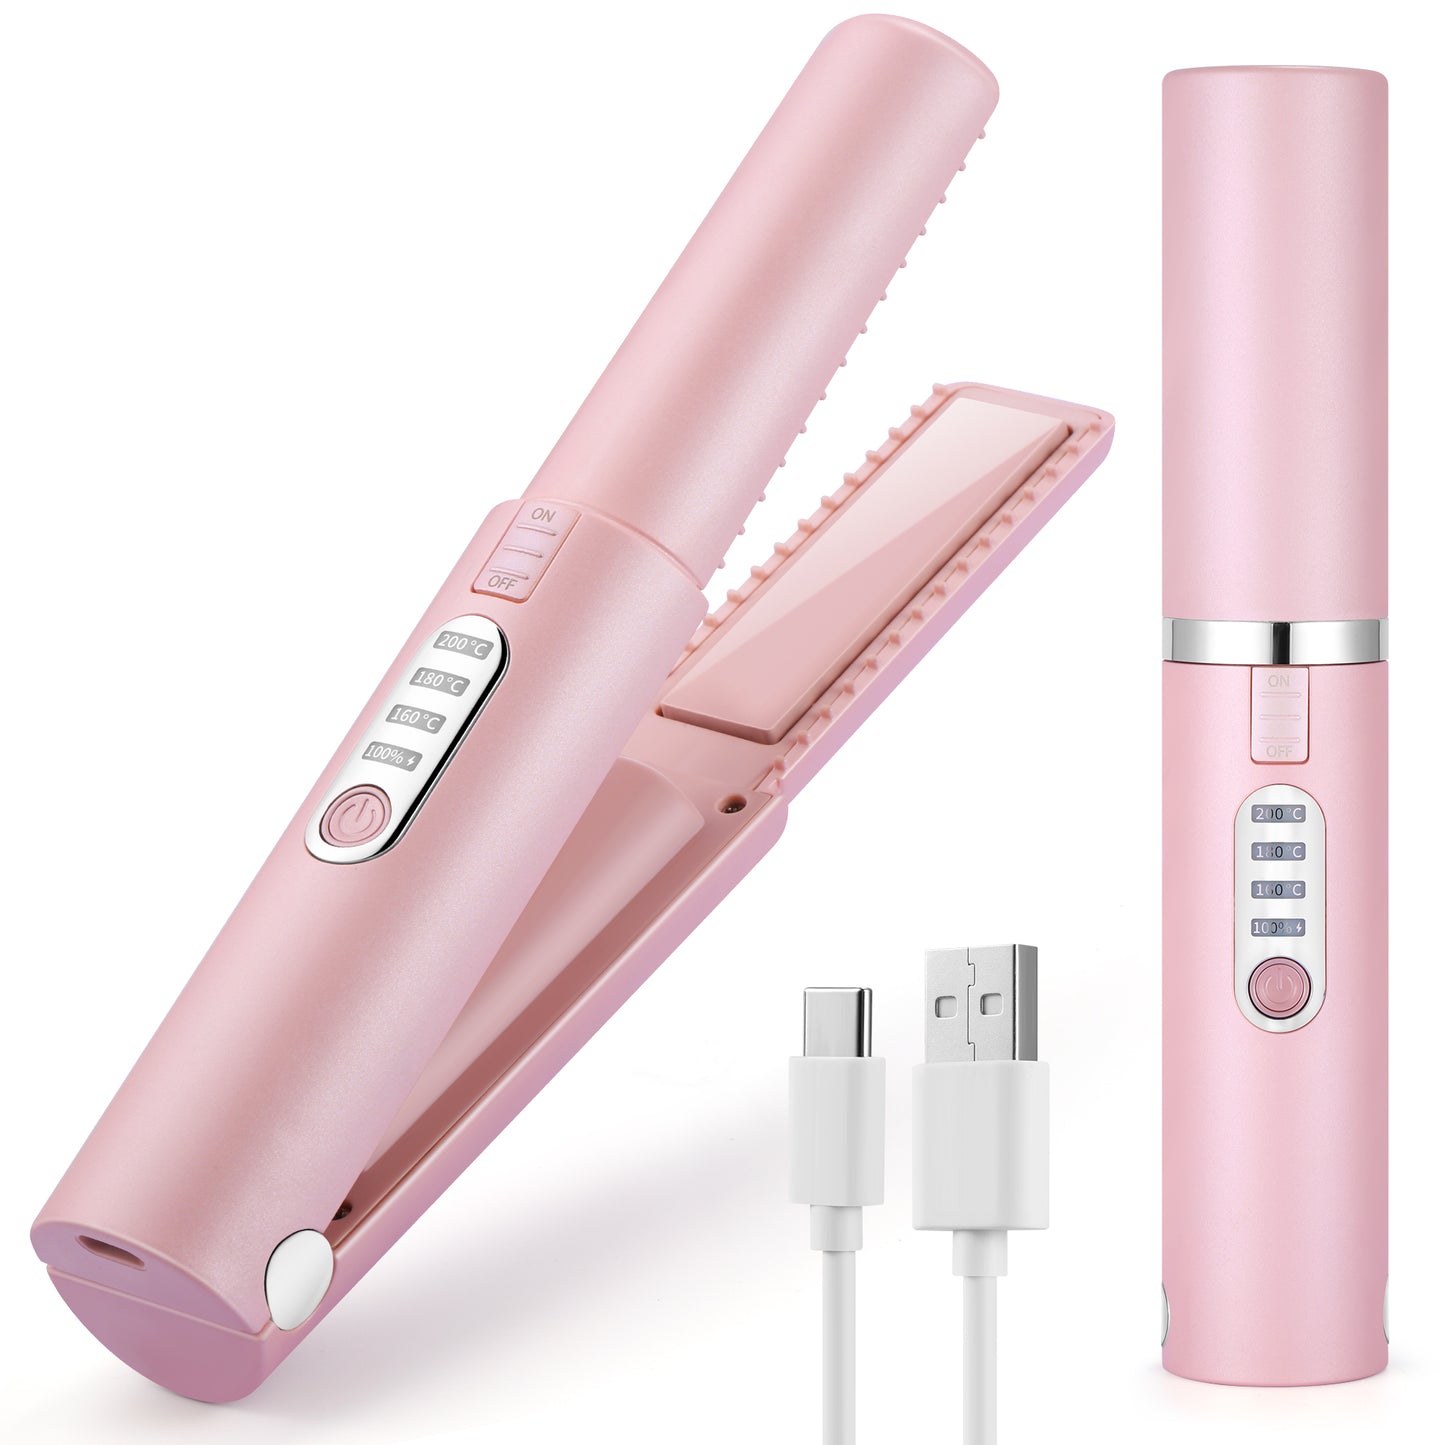 Hair Straightener (2022 New),Cordless Flat Iron,Wireless Strgightner for Hair,USB-C Rechargeable Ceramic Mini Flat Iron with 4800mA Battery, Adjustable Temperature, Travel Size (Pink)